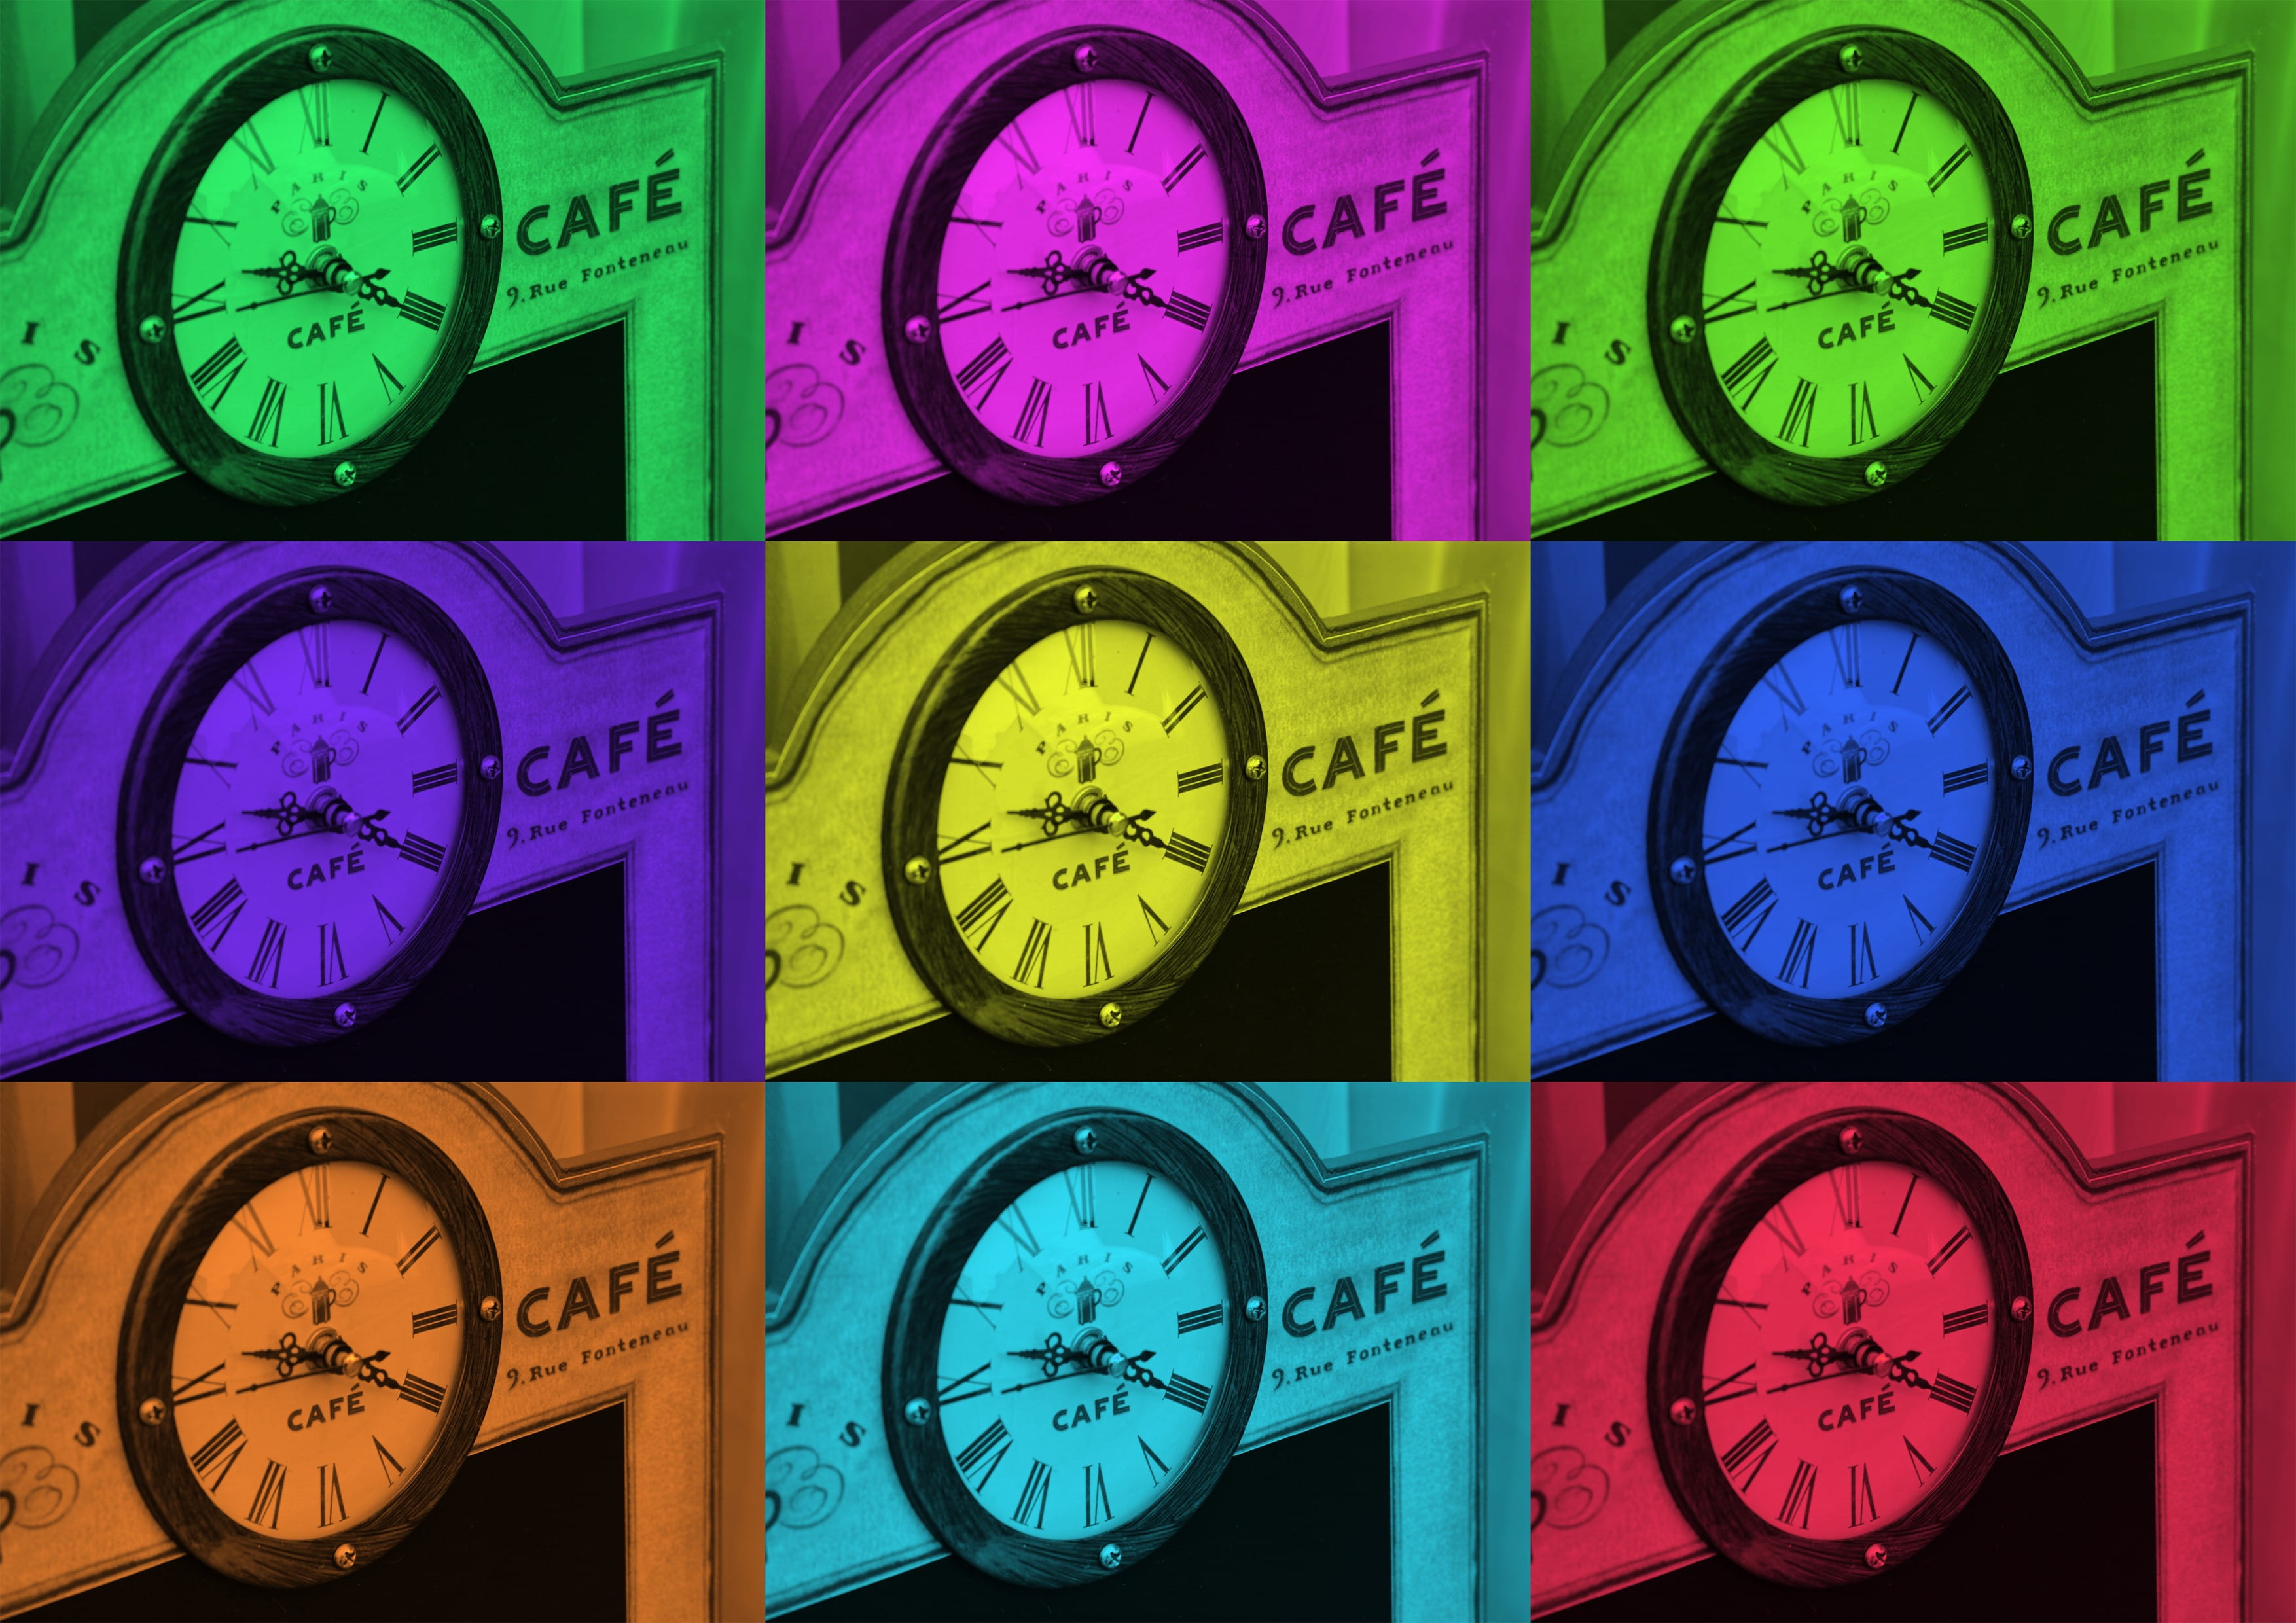 round analog clock at 10:20 collage, cafe, time of, board, shield